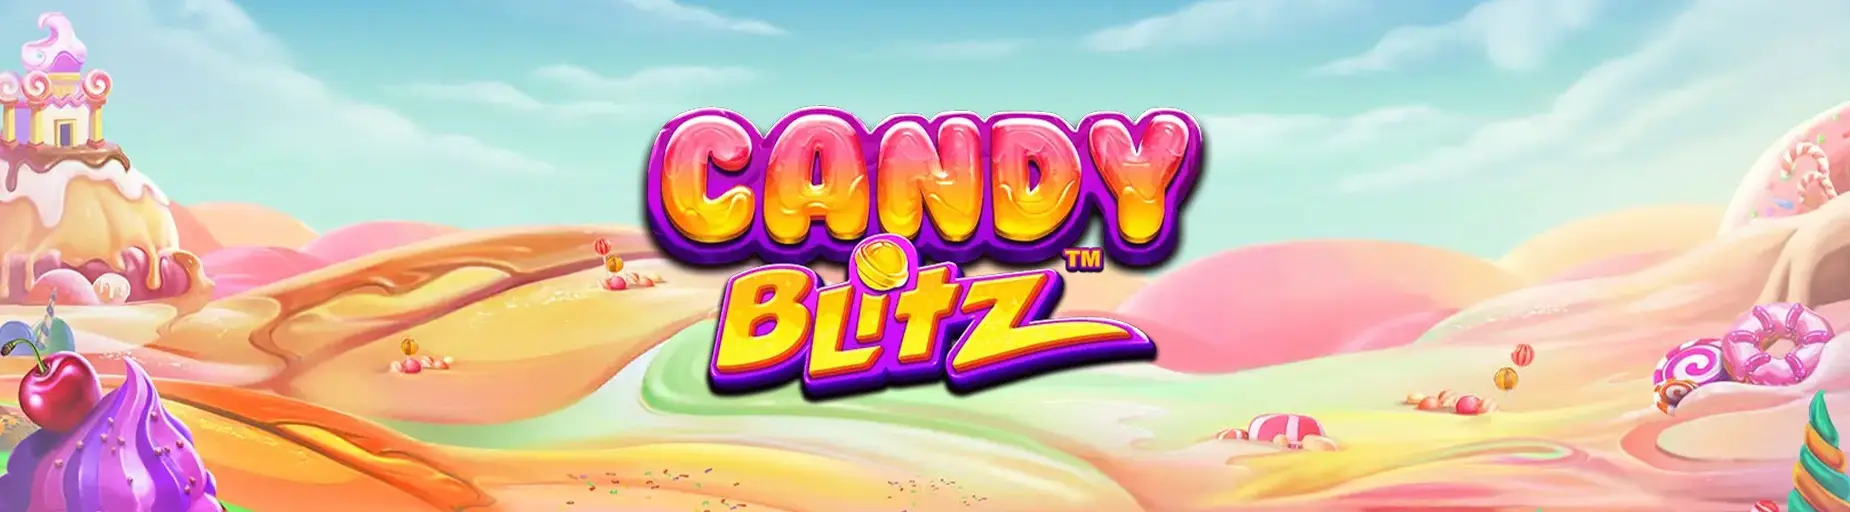 Candy Blitz Bombs Slot Review